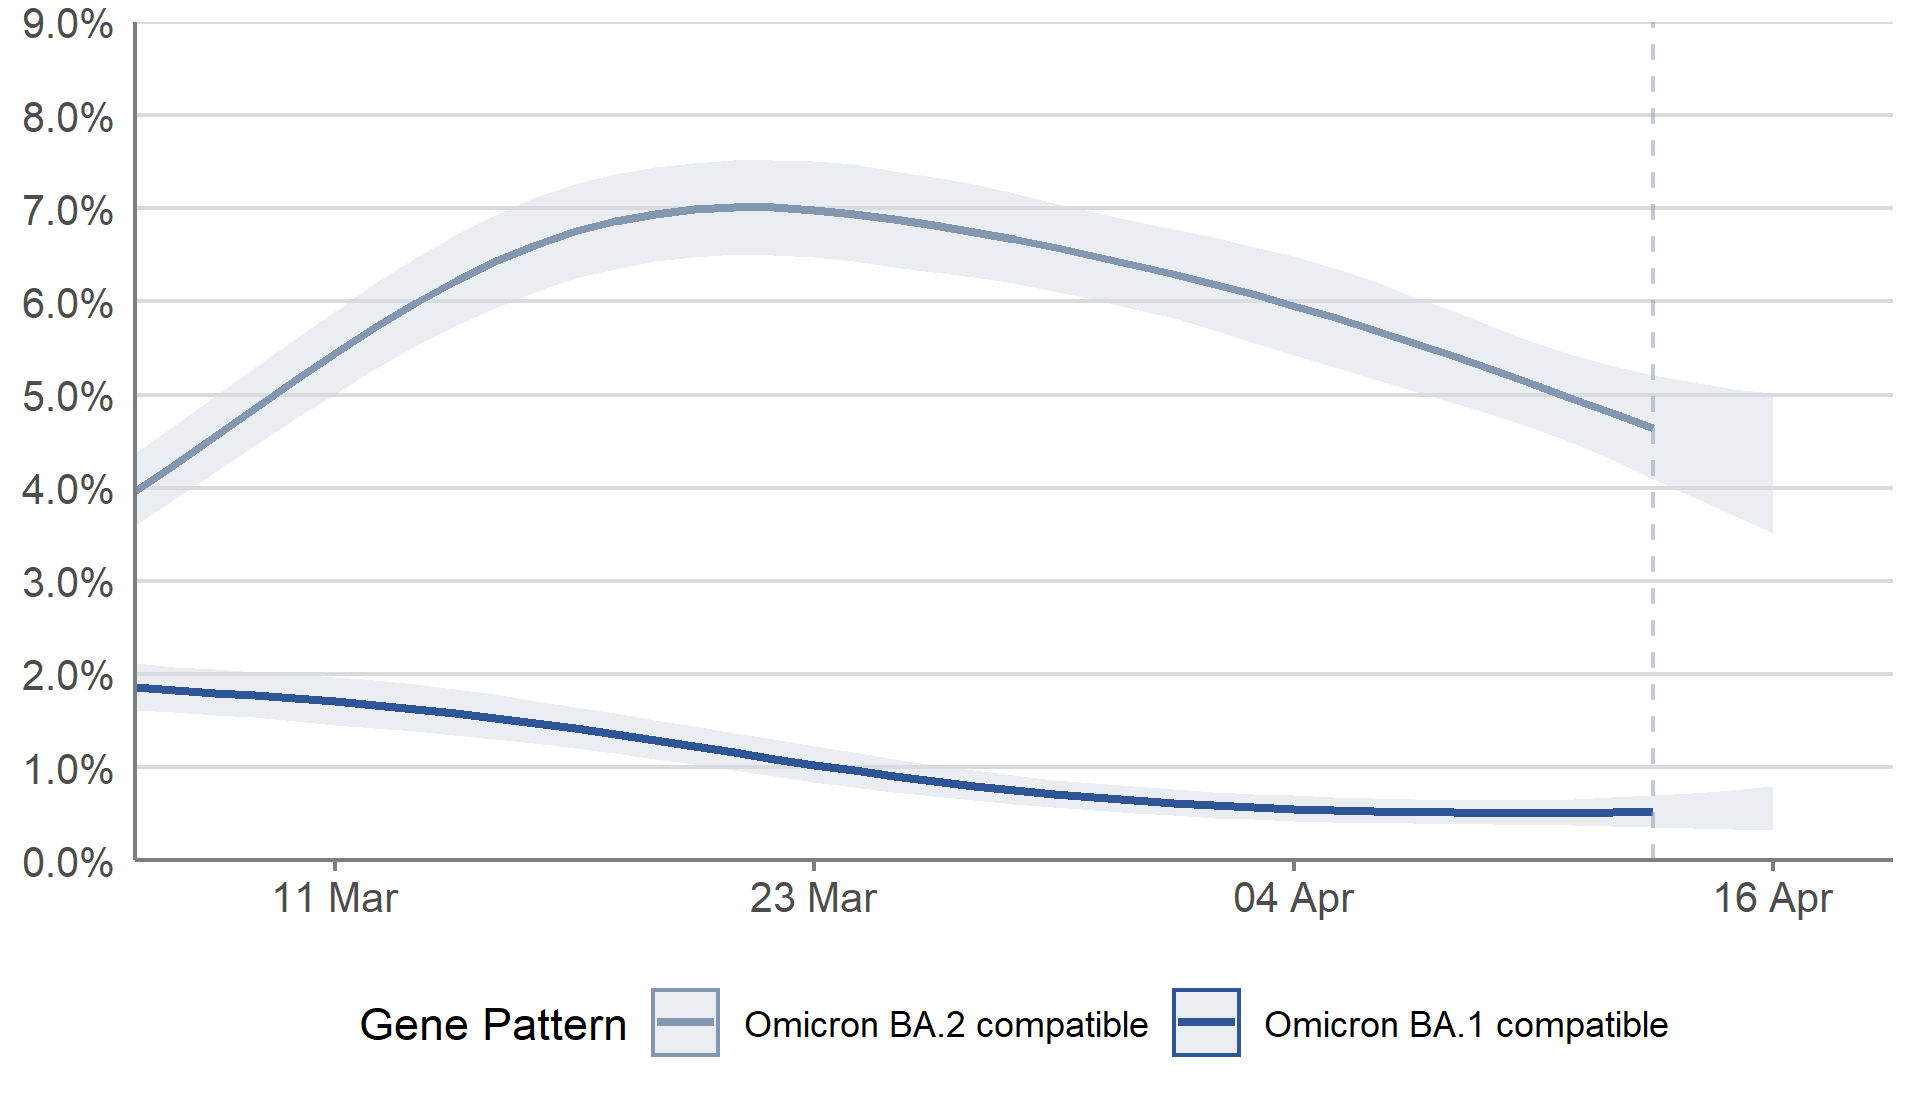 In Scotland, the percentage of people with infections compatible with the Omicron BA.2 variant continued to decrease in the most recent week. The trend in the percentage of people with infections compatible with the Omicron BA.1 variant was uncertain in the most recent week.